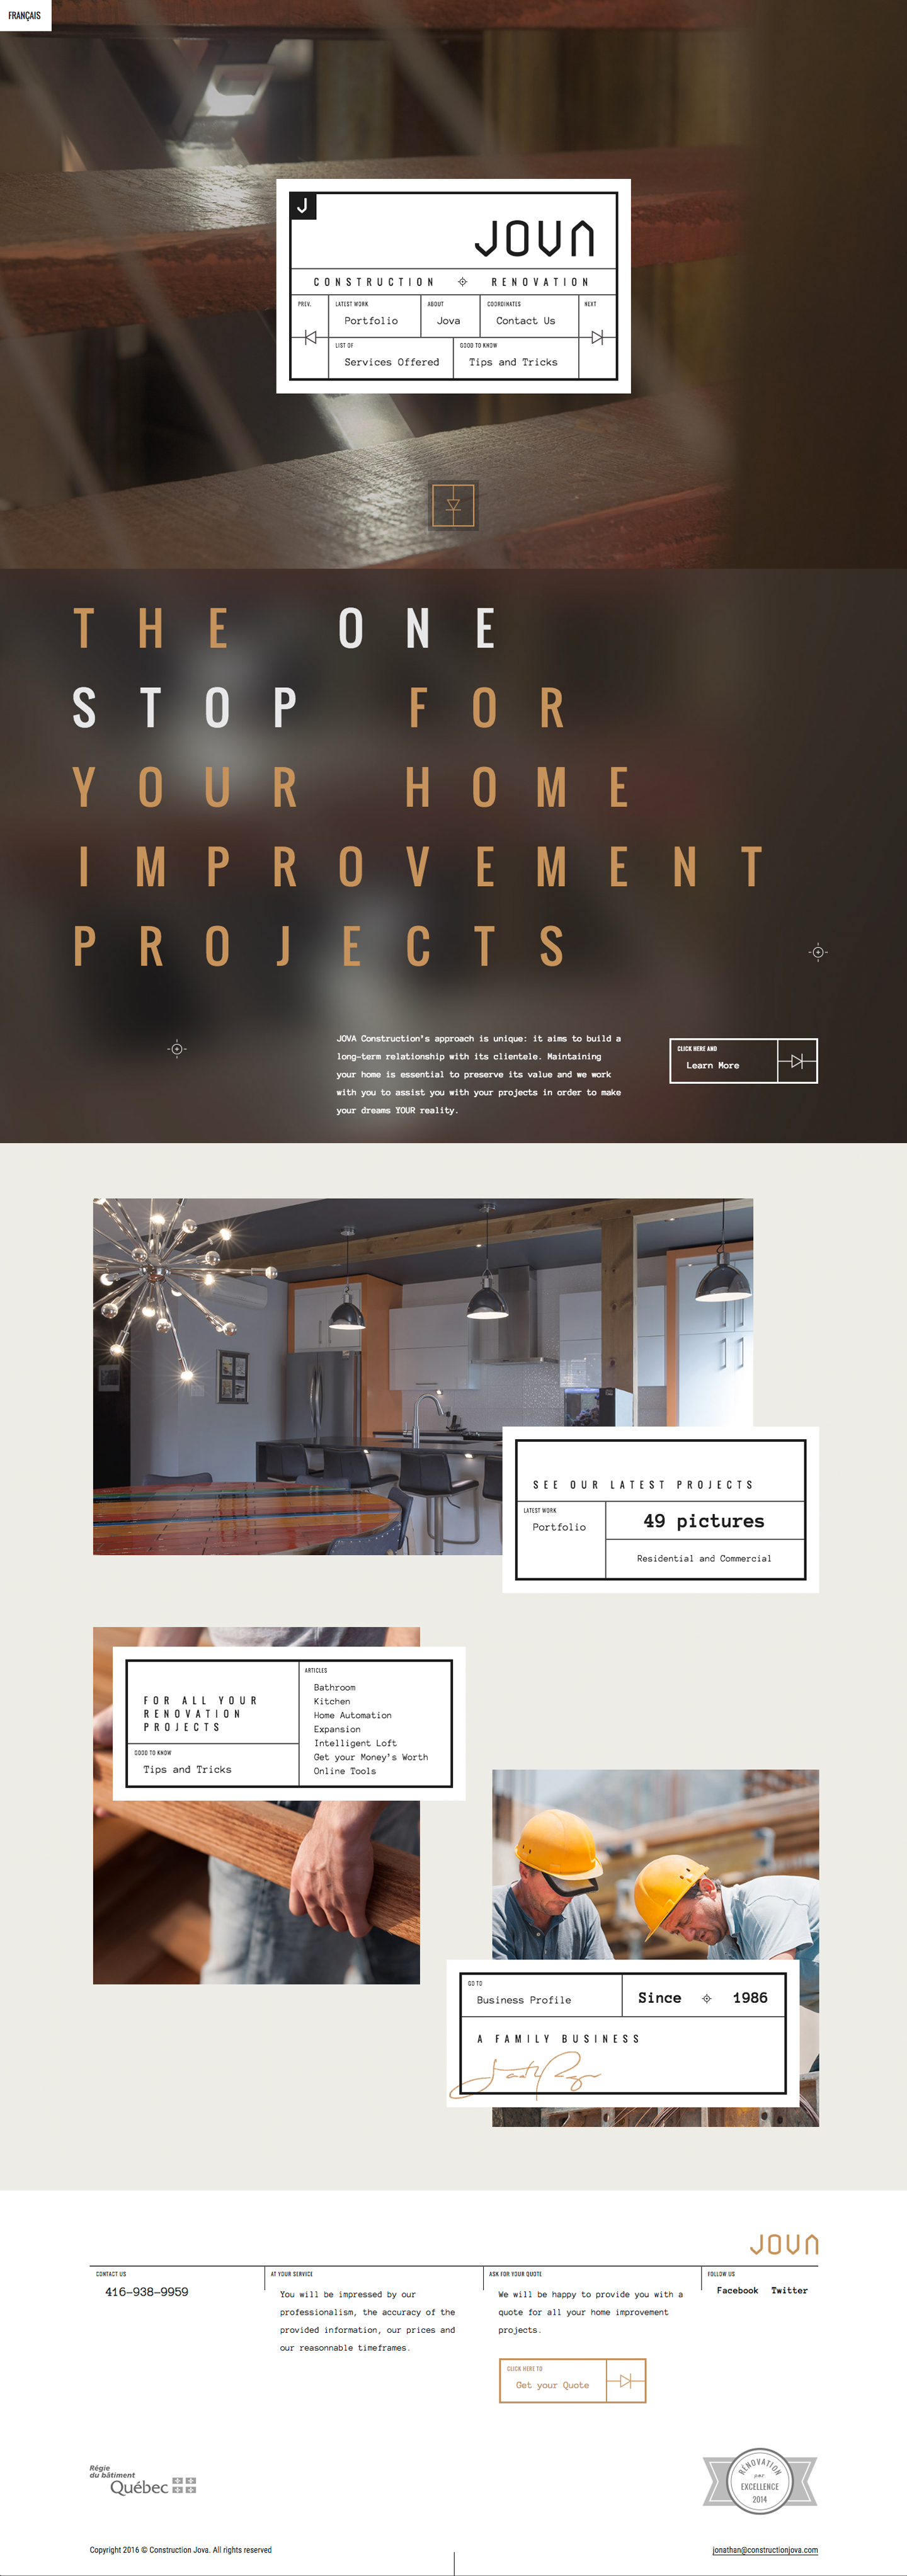 Are these the 10 Best Contractor Website Designs for 2016?